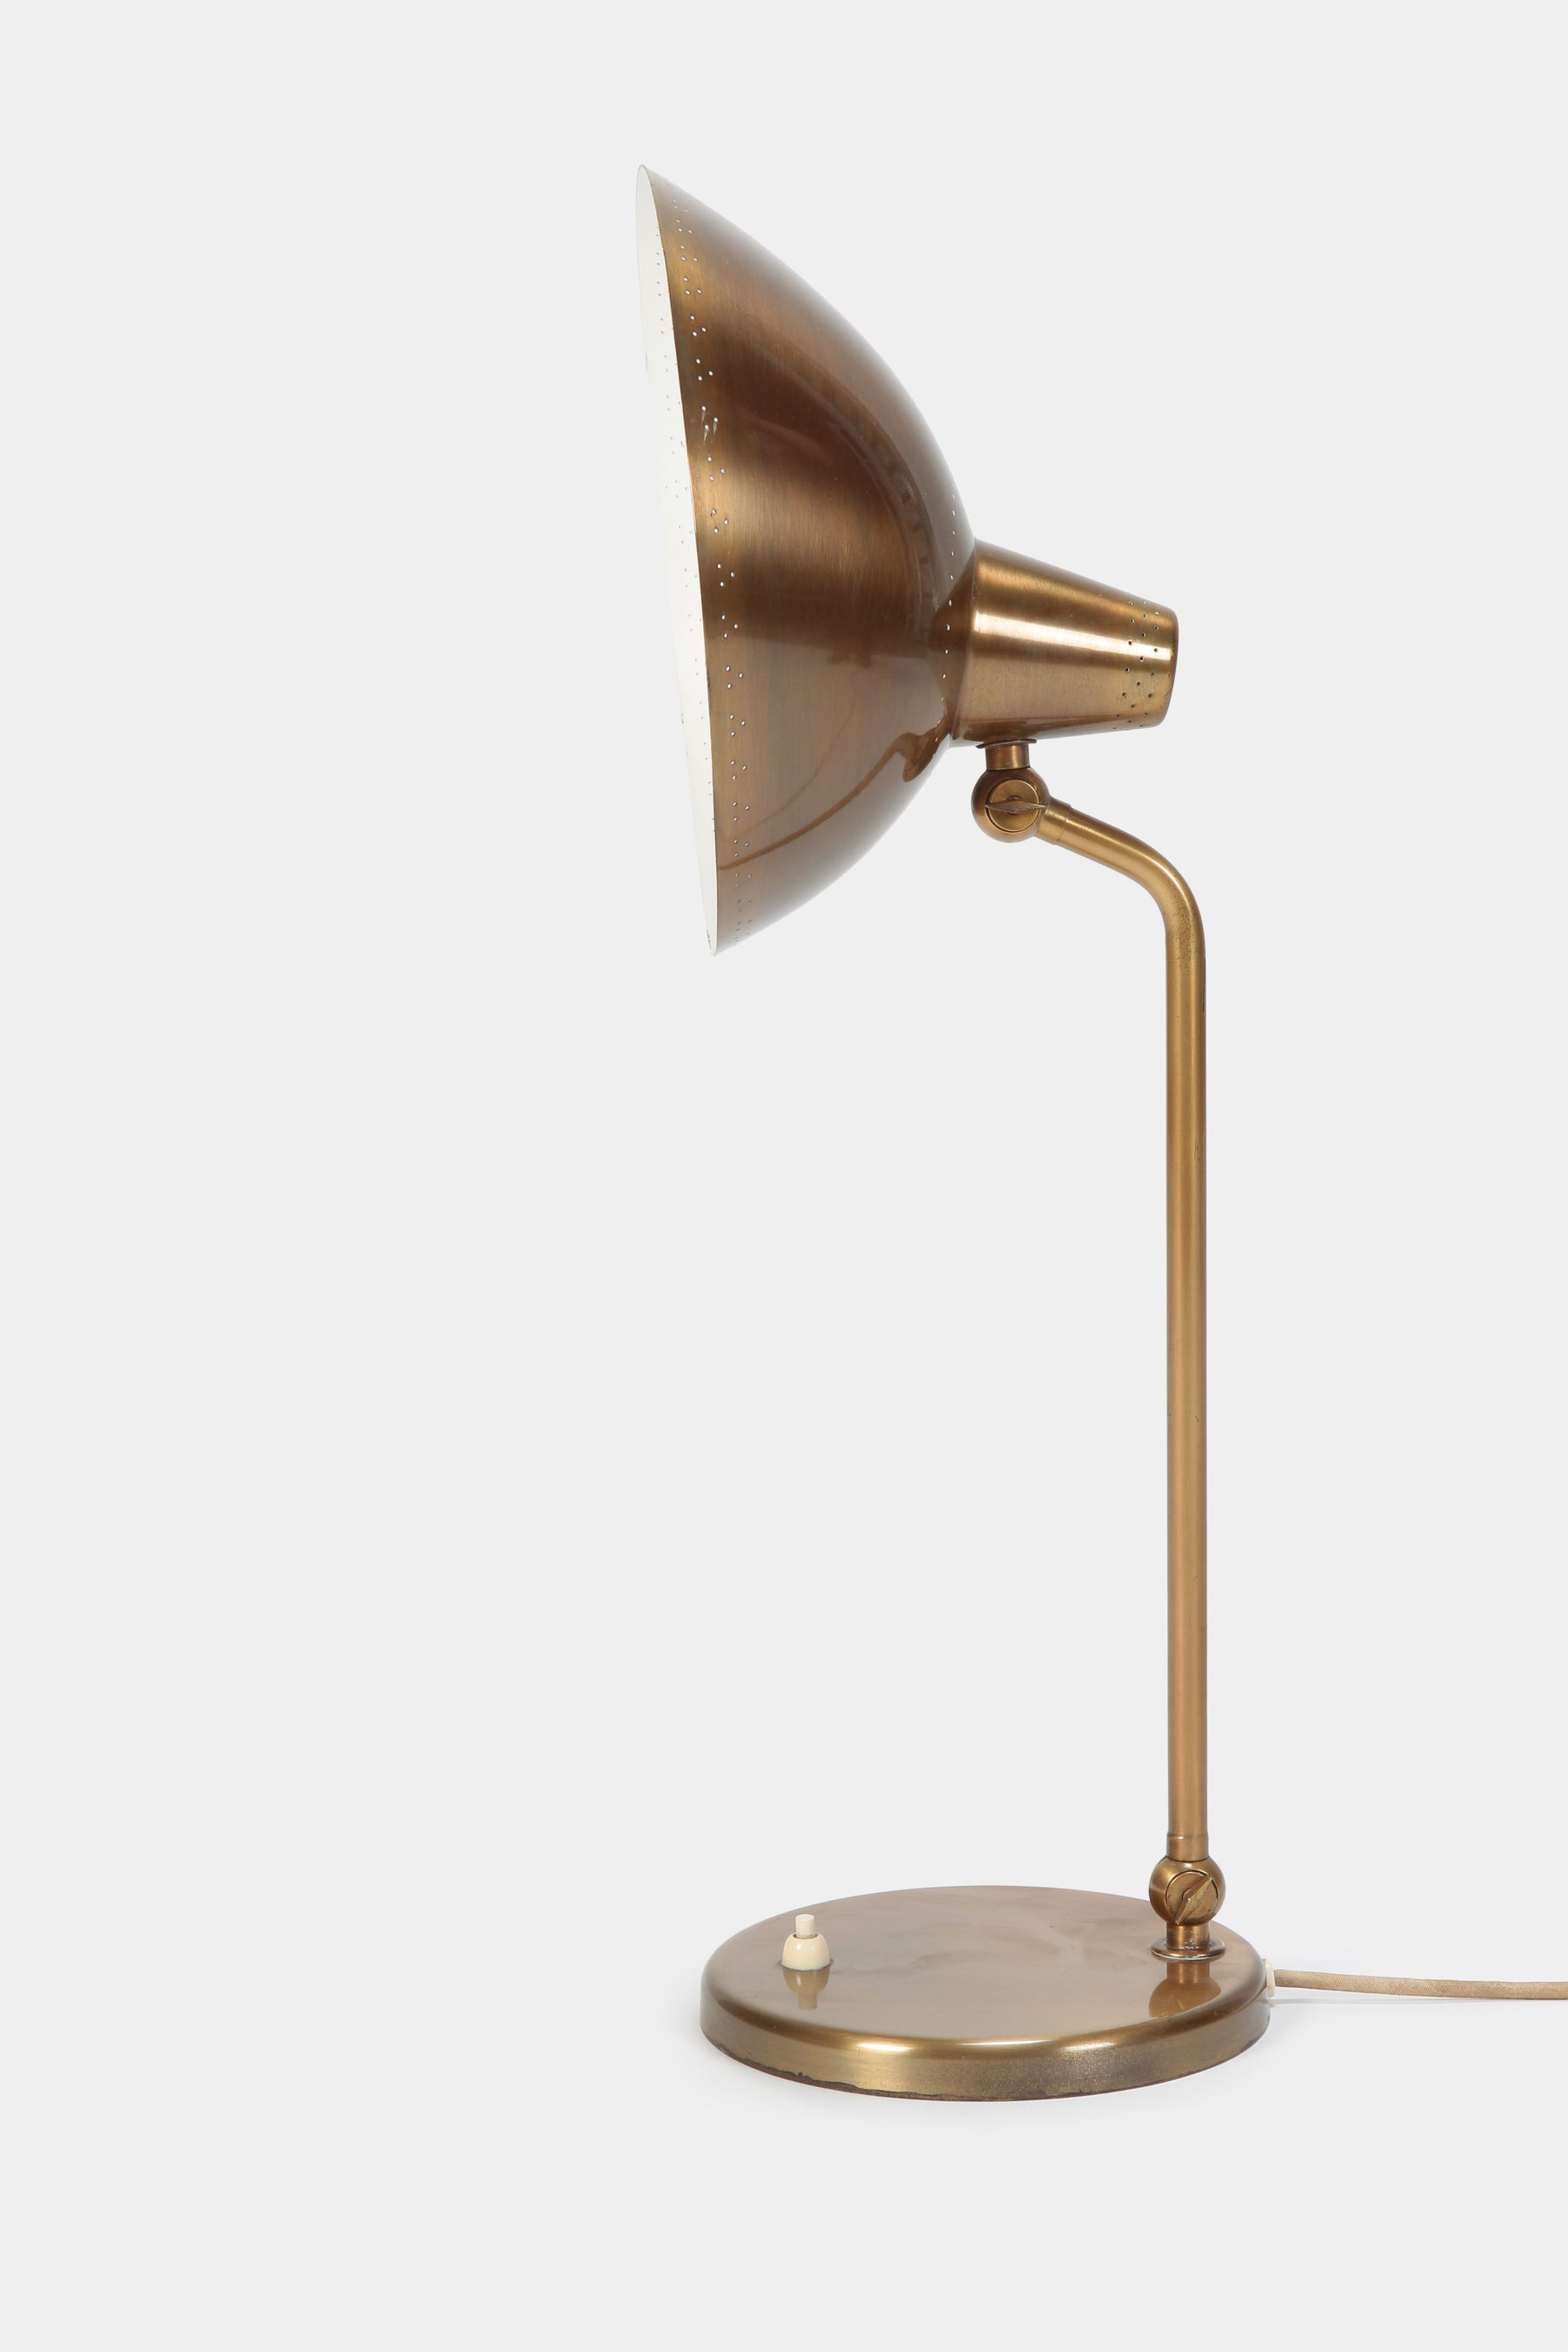 Alfred Müller "Adria" Table Lamp - Model 6420, 50s